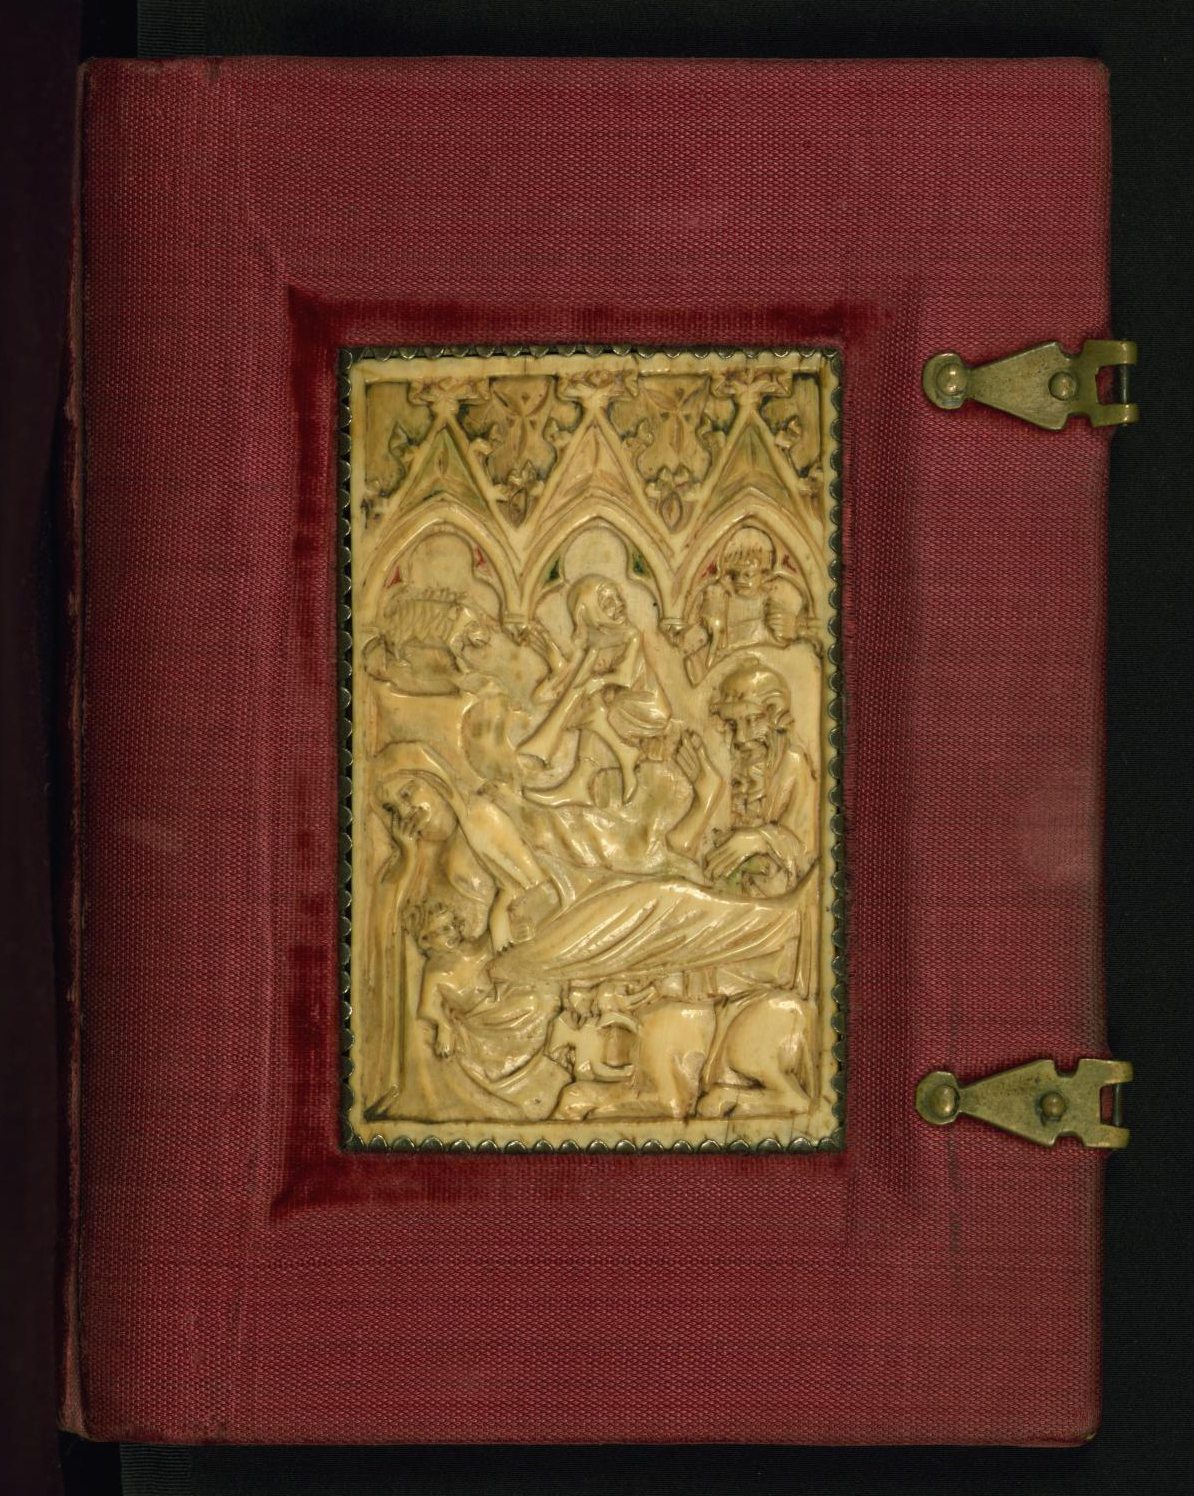 Bible Pictures by William de Brailes | The Walters Art Museum